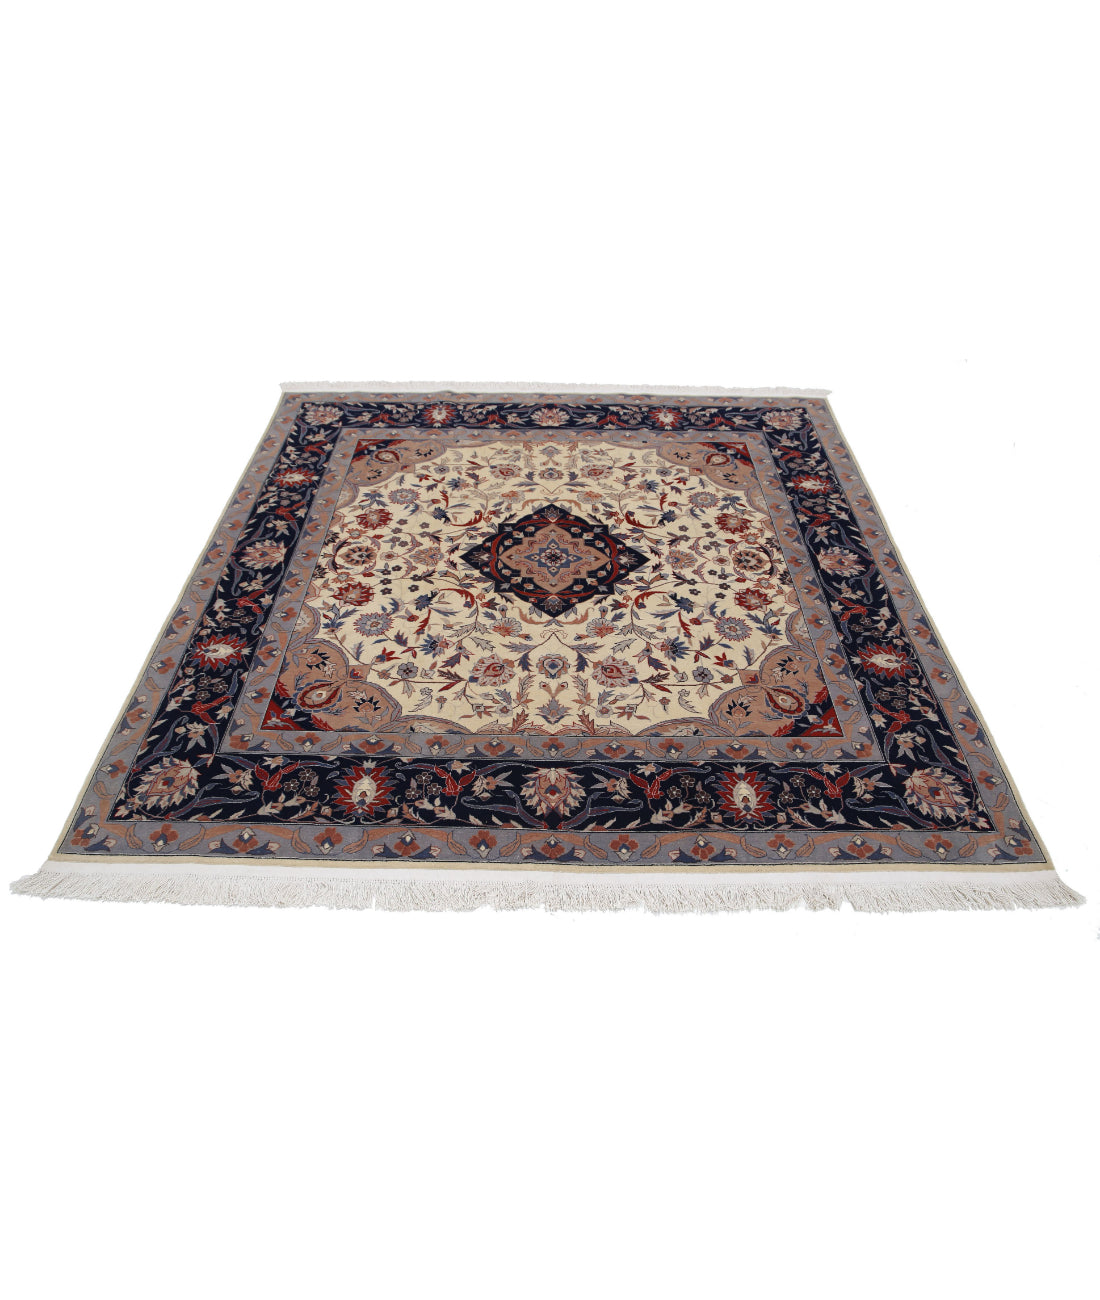 Heritage 6'1'' X 6'1'' Hand-Knotted Wool Rug 6'1'' x 6'1'' (183 X 183) / Ivory / Blue